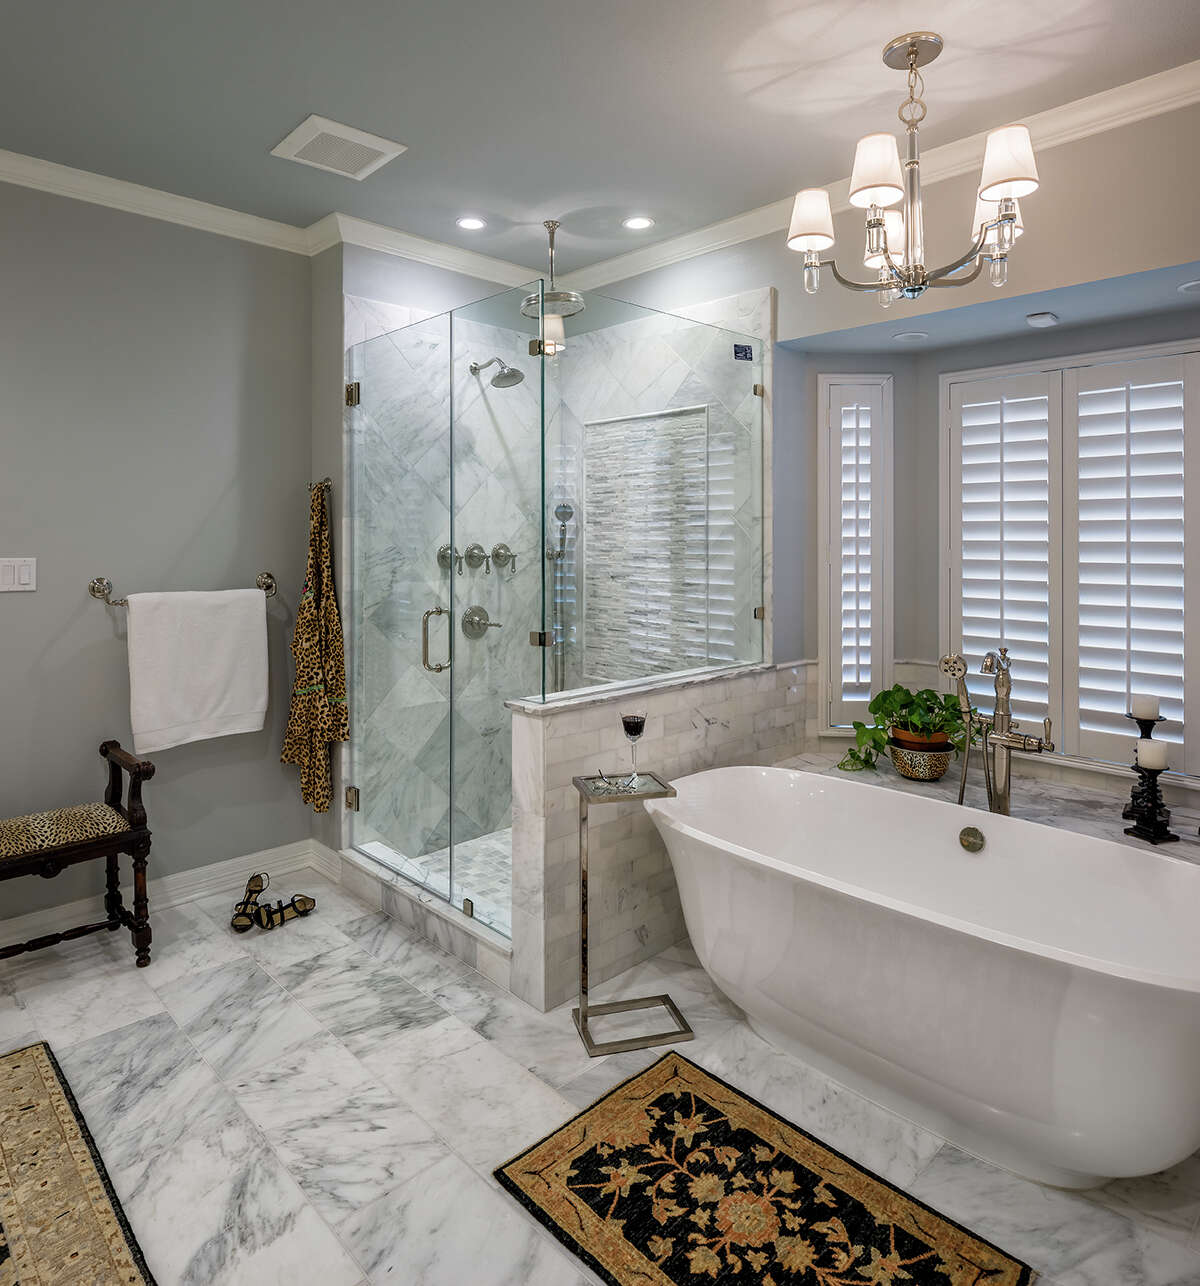 The Megnas' former shower with a wall of glass blocks was transformed with frameless glass walls and marble tile.